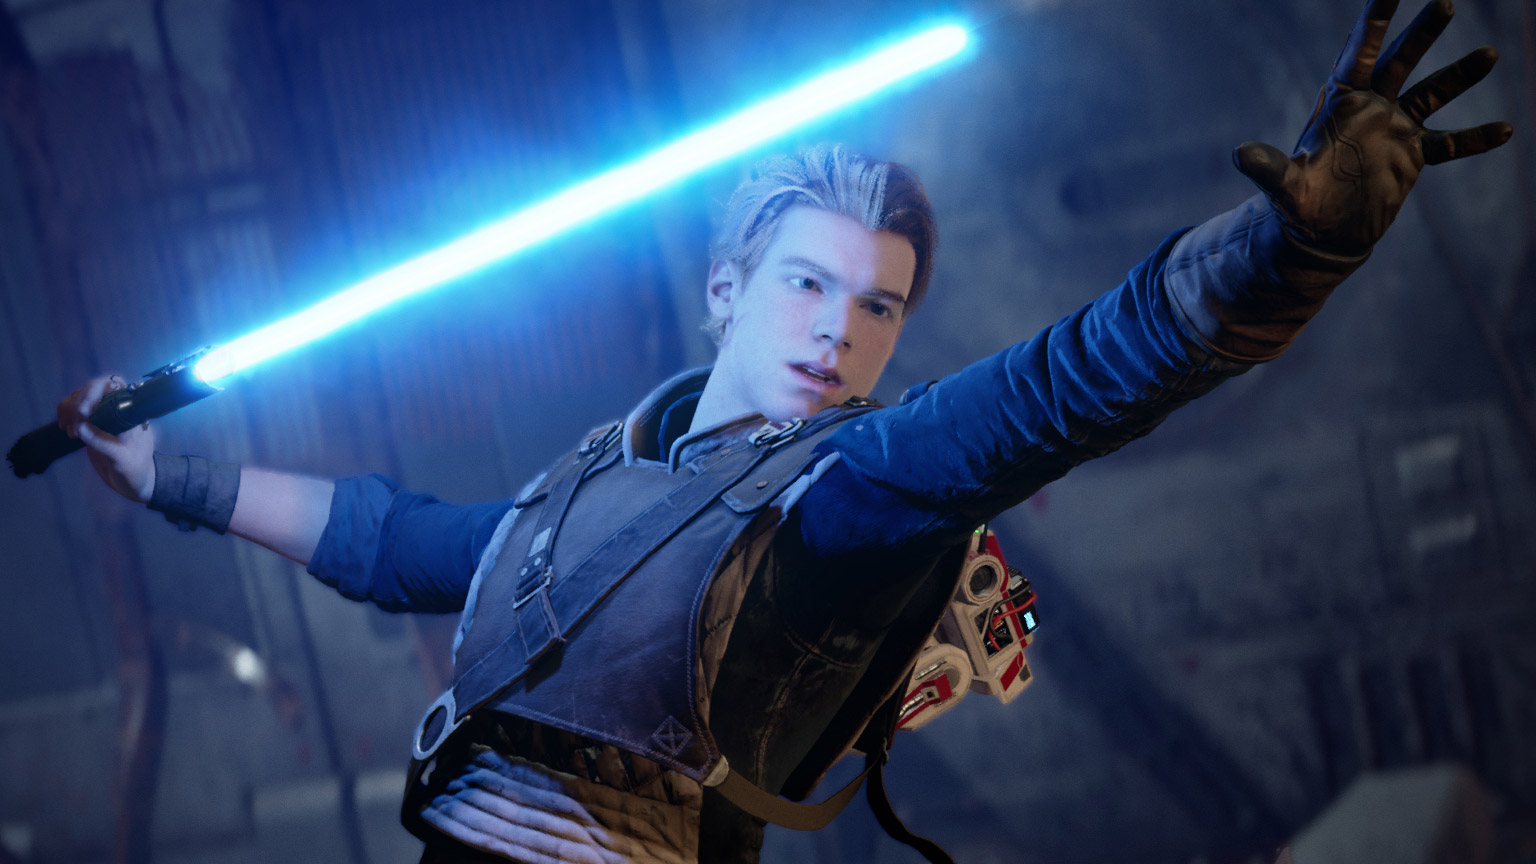 What Is The Star Wars Jedi: Fallen Order Is All About? Here’s A Quick Rundown Of What To Expect